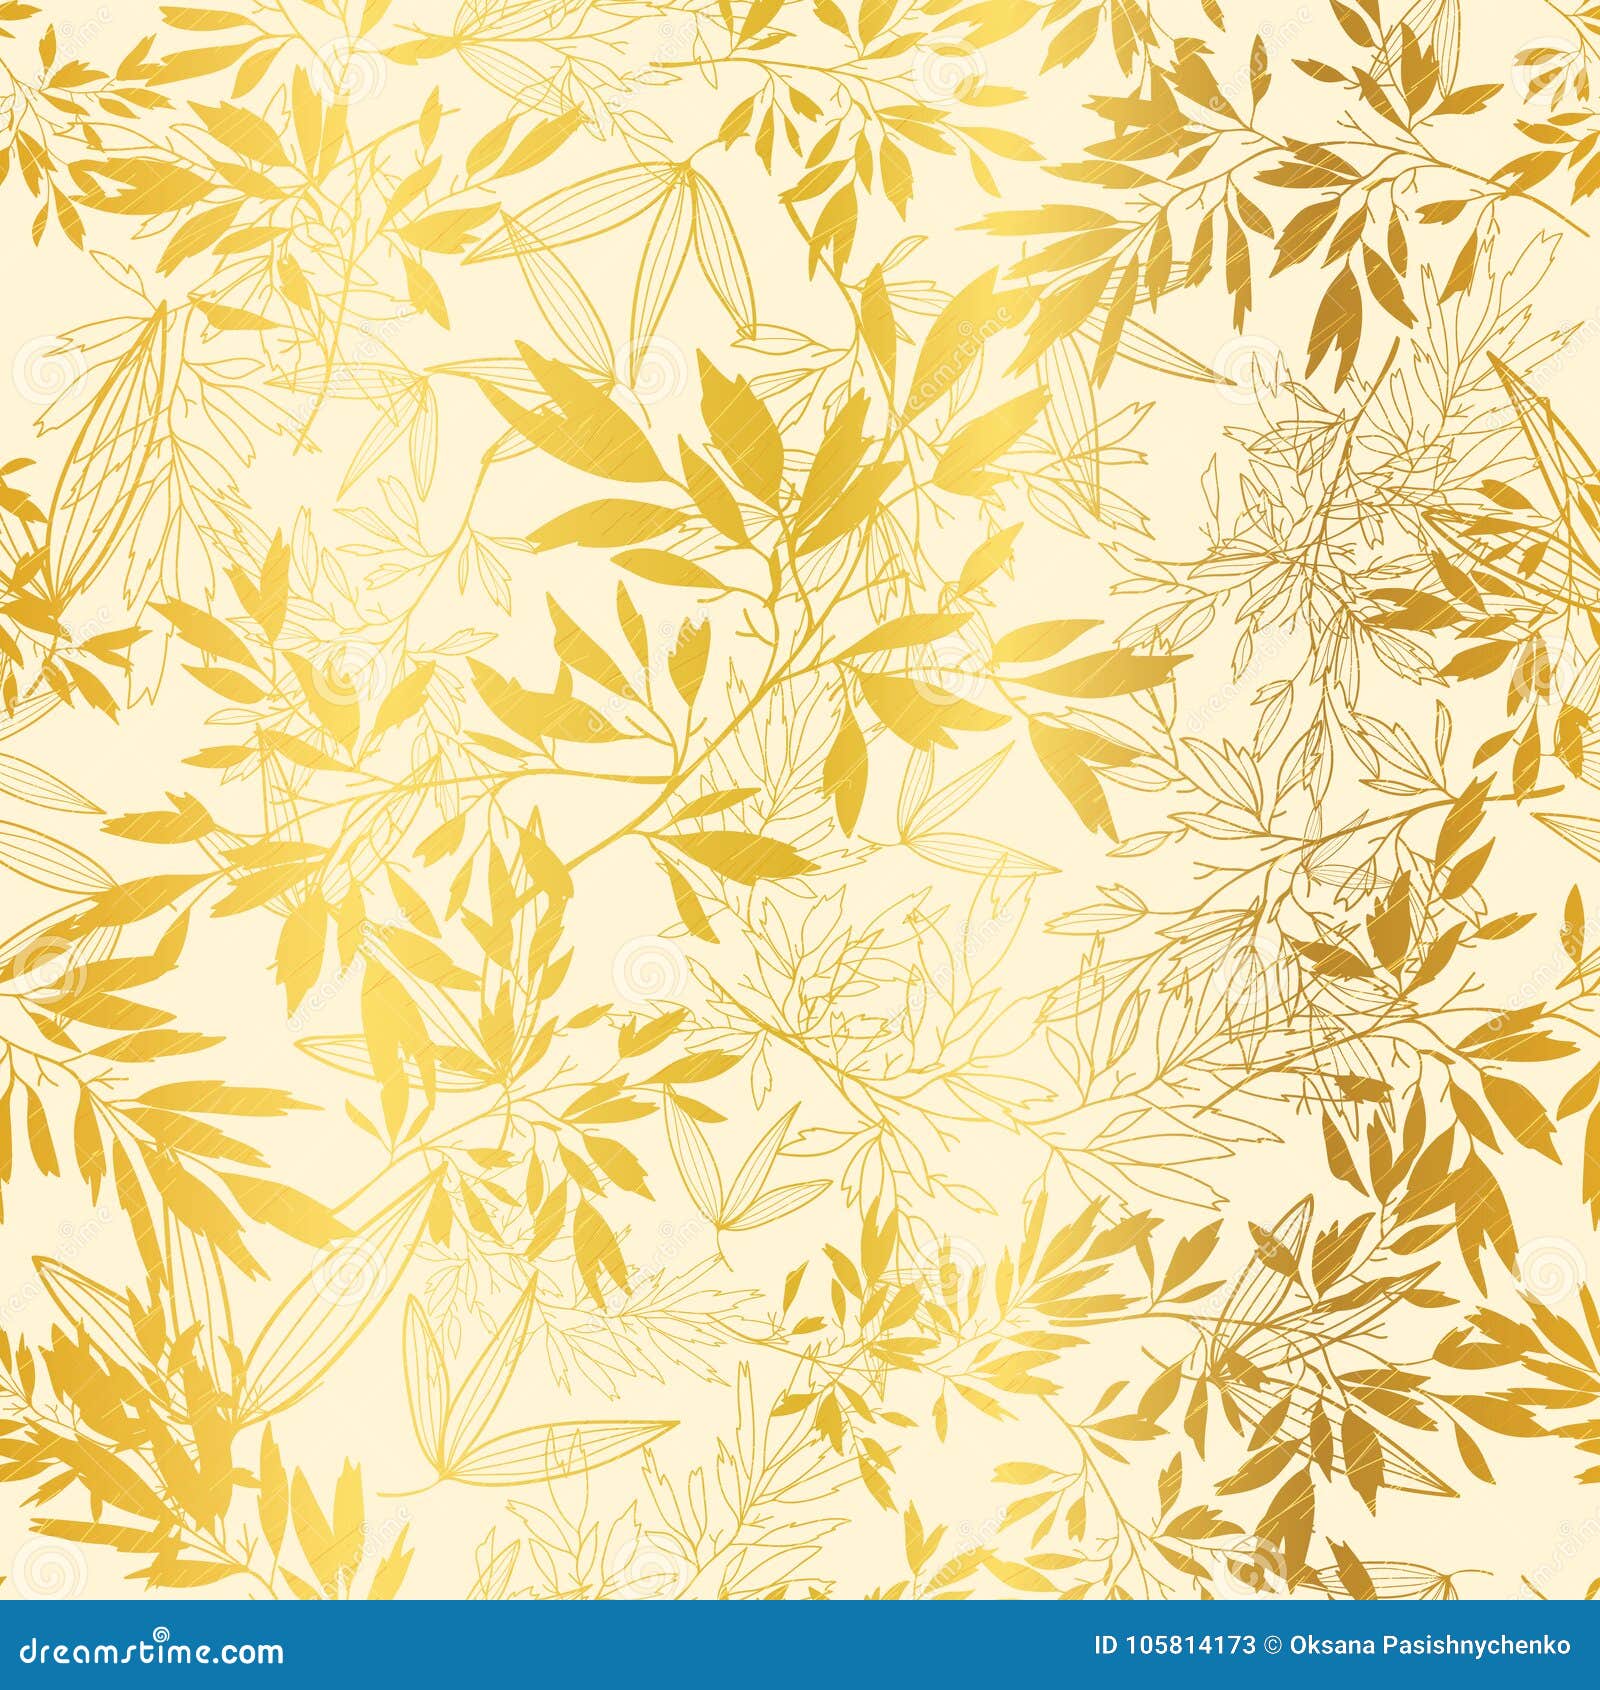 Vector Gold Yellow Leaves and Branches Repeat Seamless Pattern